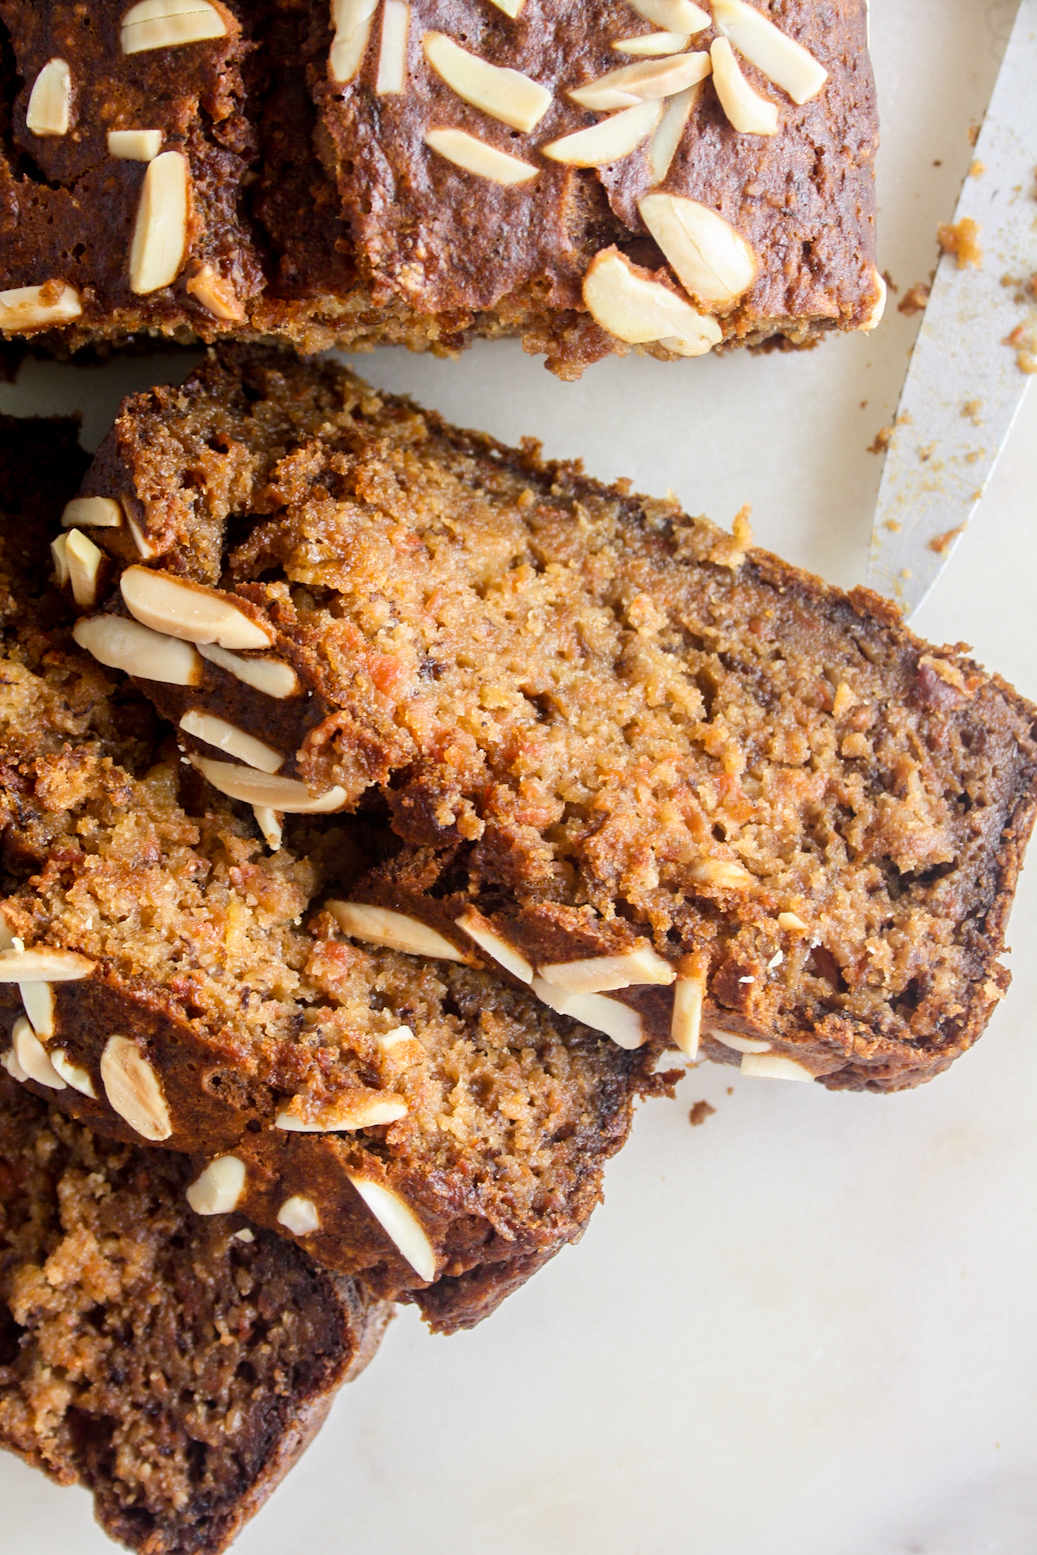 Moist carrot cake with ground almonds and oats for texture